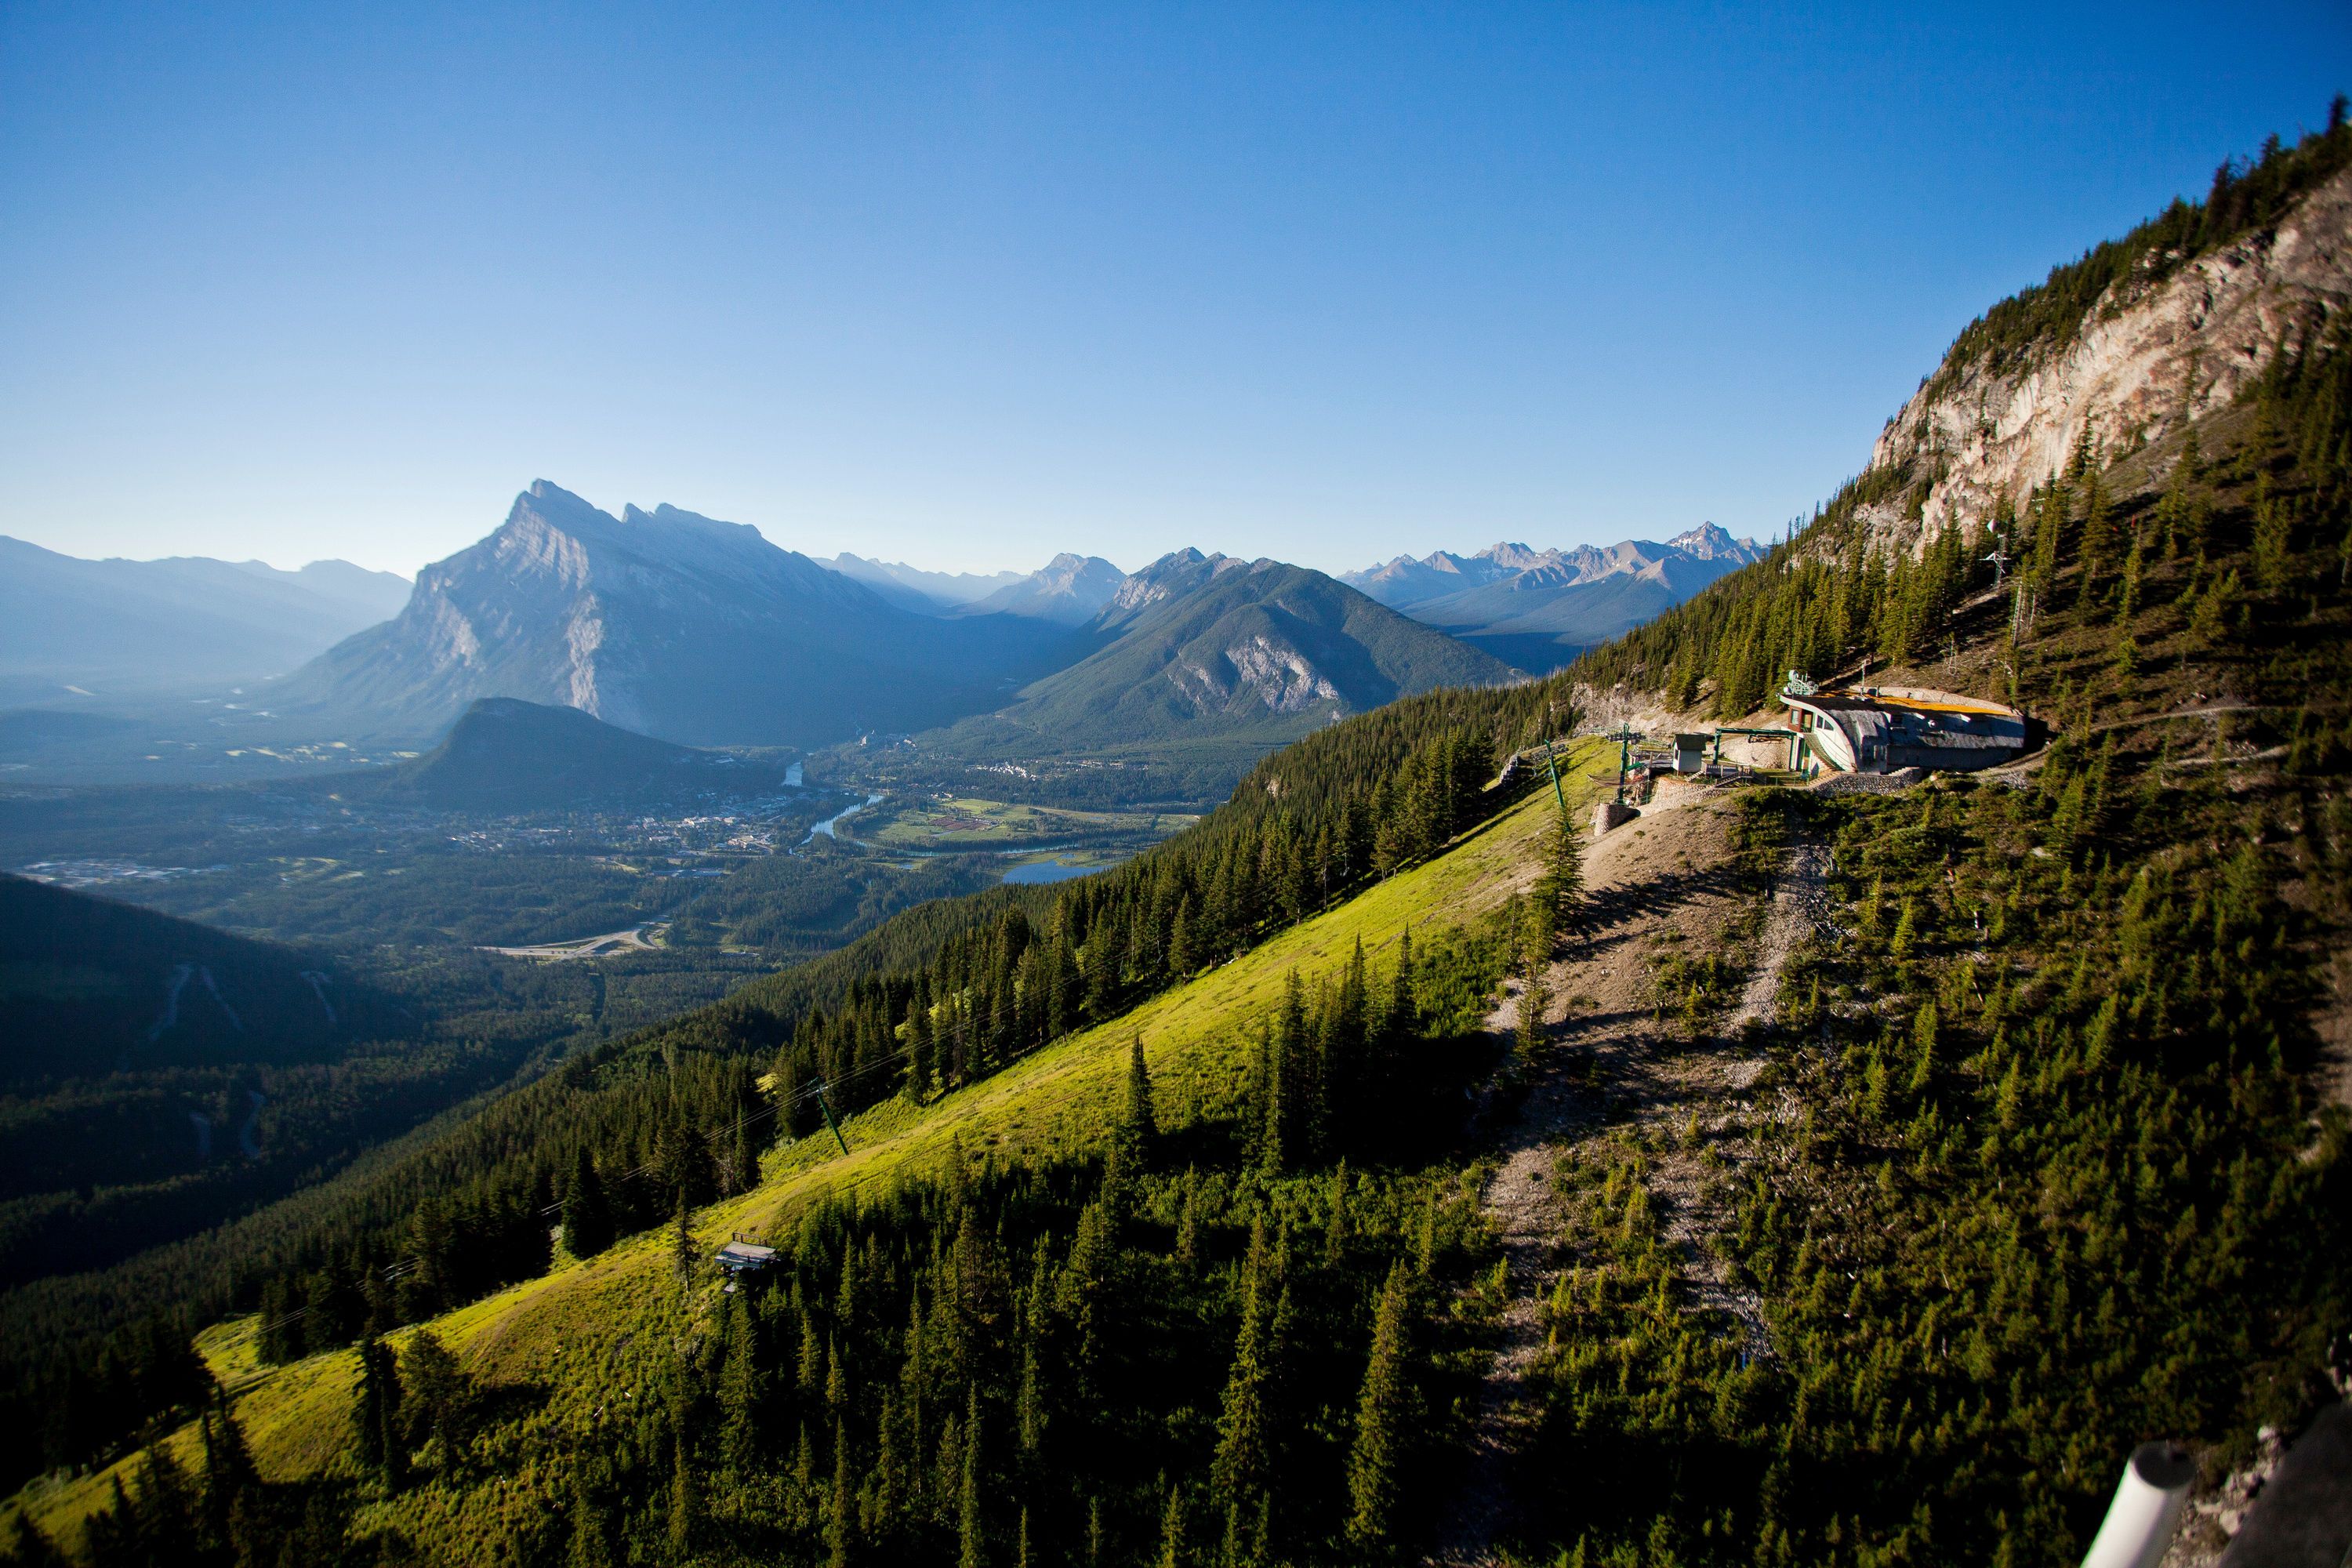 Wallpapers Banff National Park, Mount Norquay, Mountains, Canada